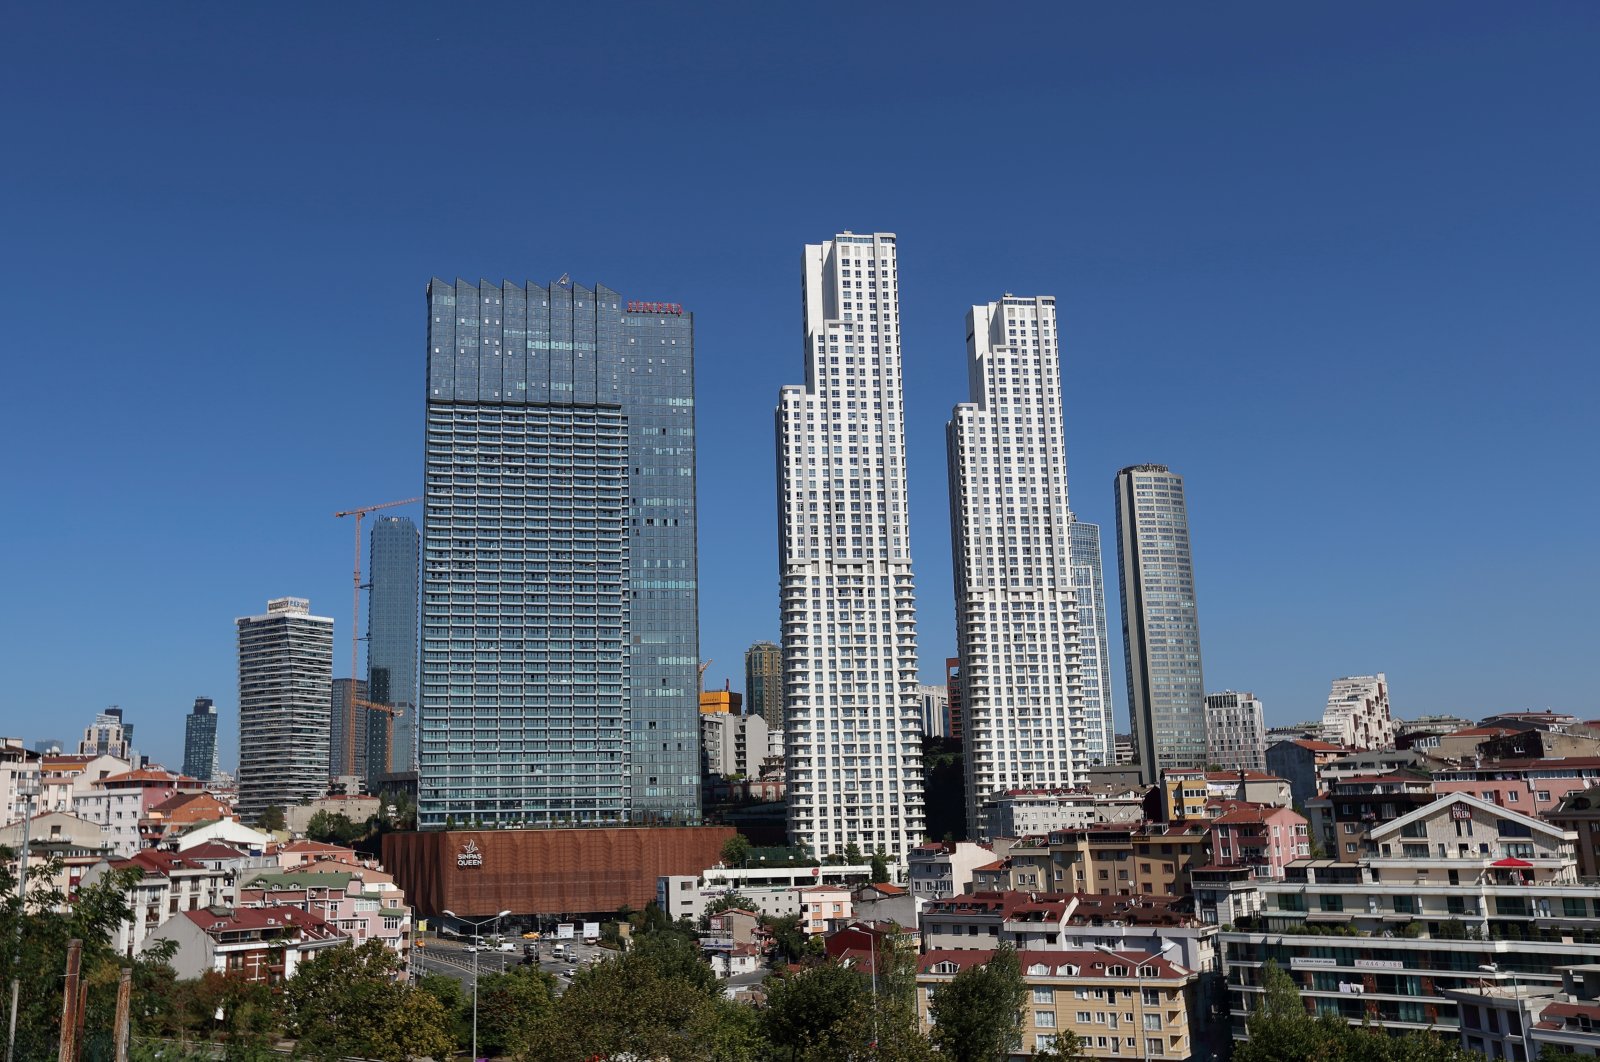 Business and residential buildings are seen in the Şişli district in Istanbul, Turkey, Sept. 7, 2020. (Reuters Photo)